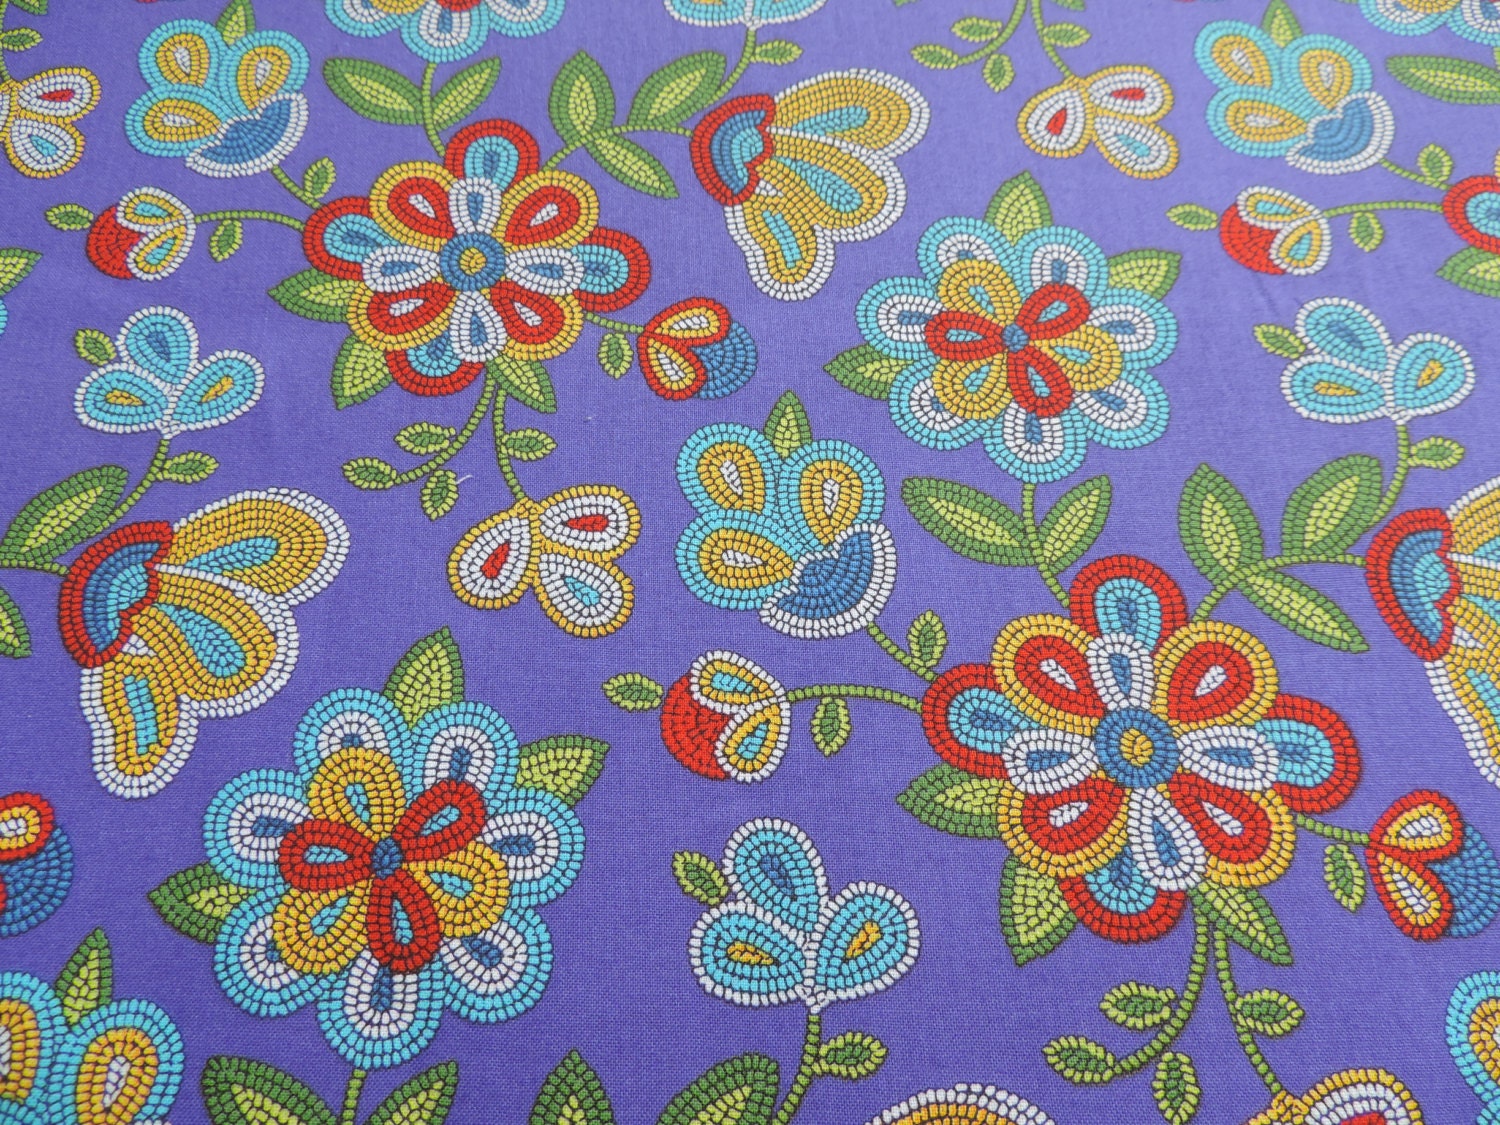 Native American design fabric that looks like floral bead